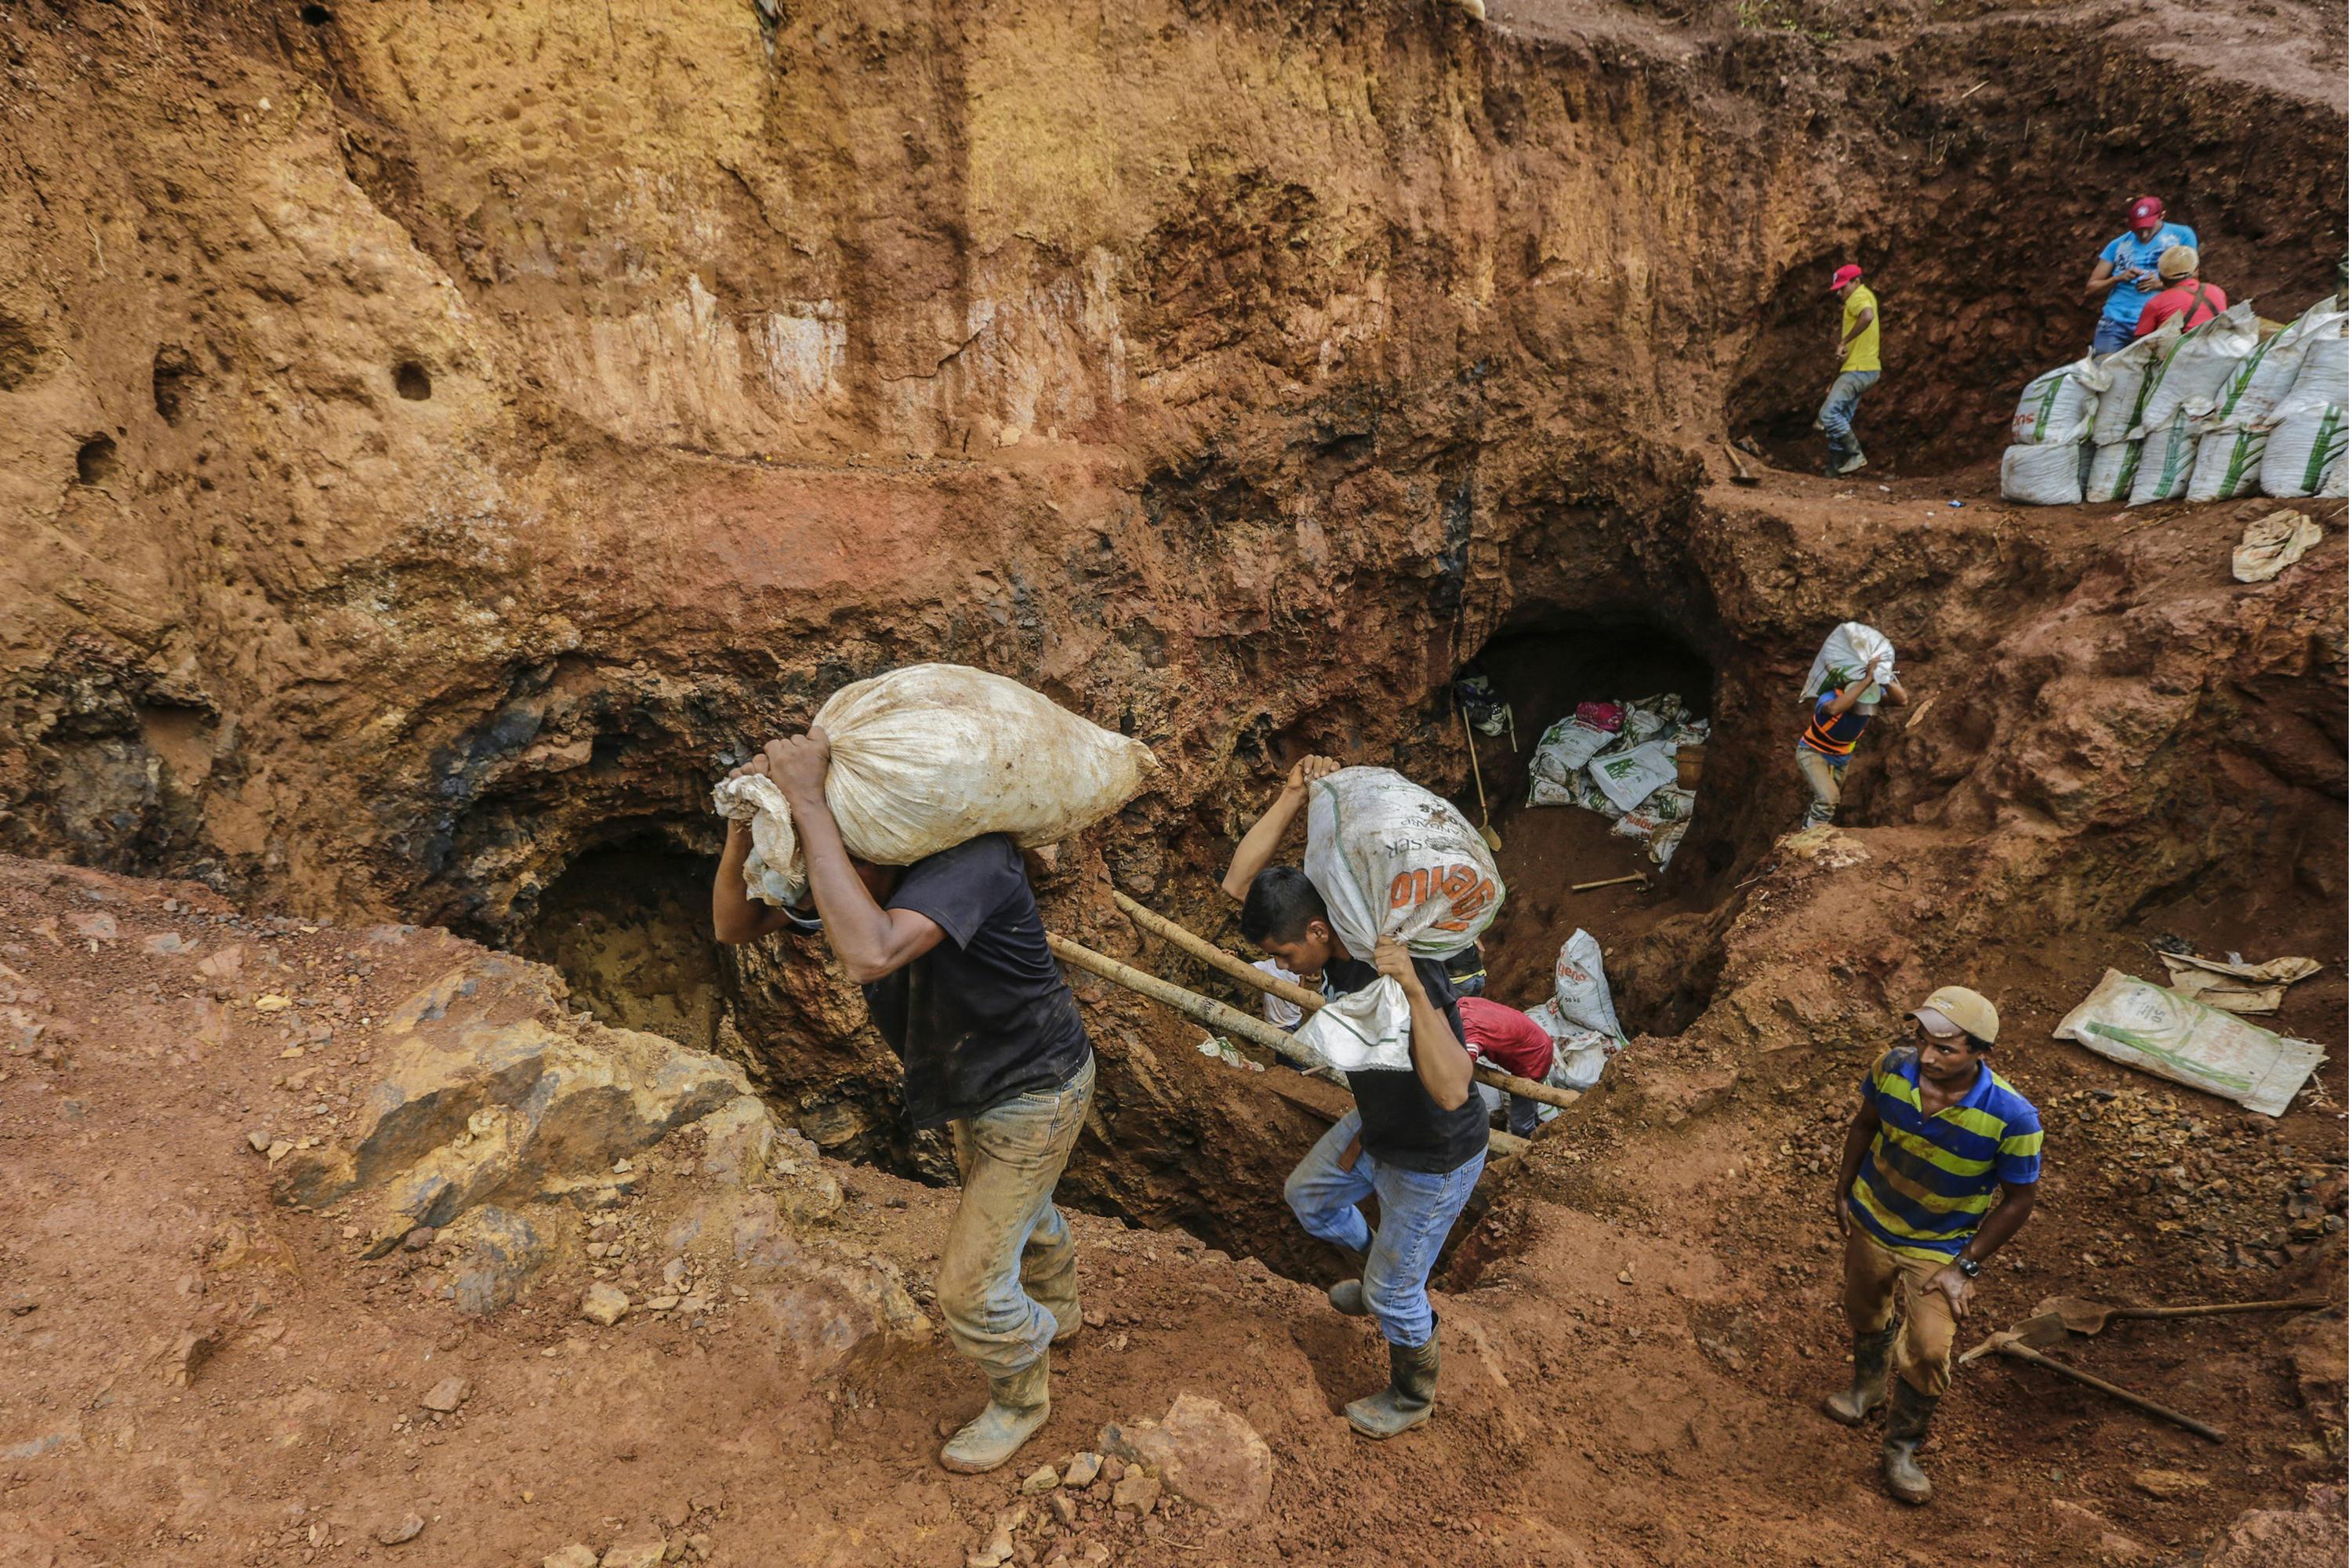 (FILES) In this file photo taken on March 07, 2017 miners carry sacks with rocks to be crushed, in order to extract gold, in the 